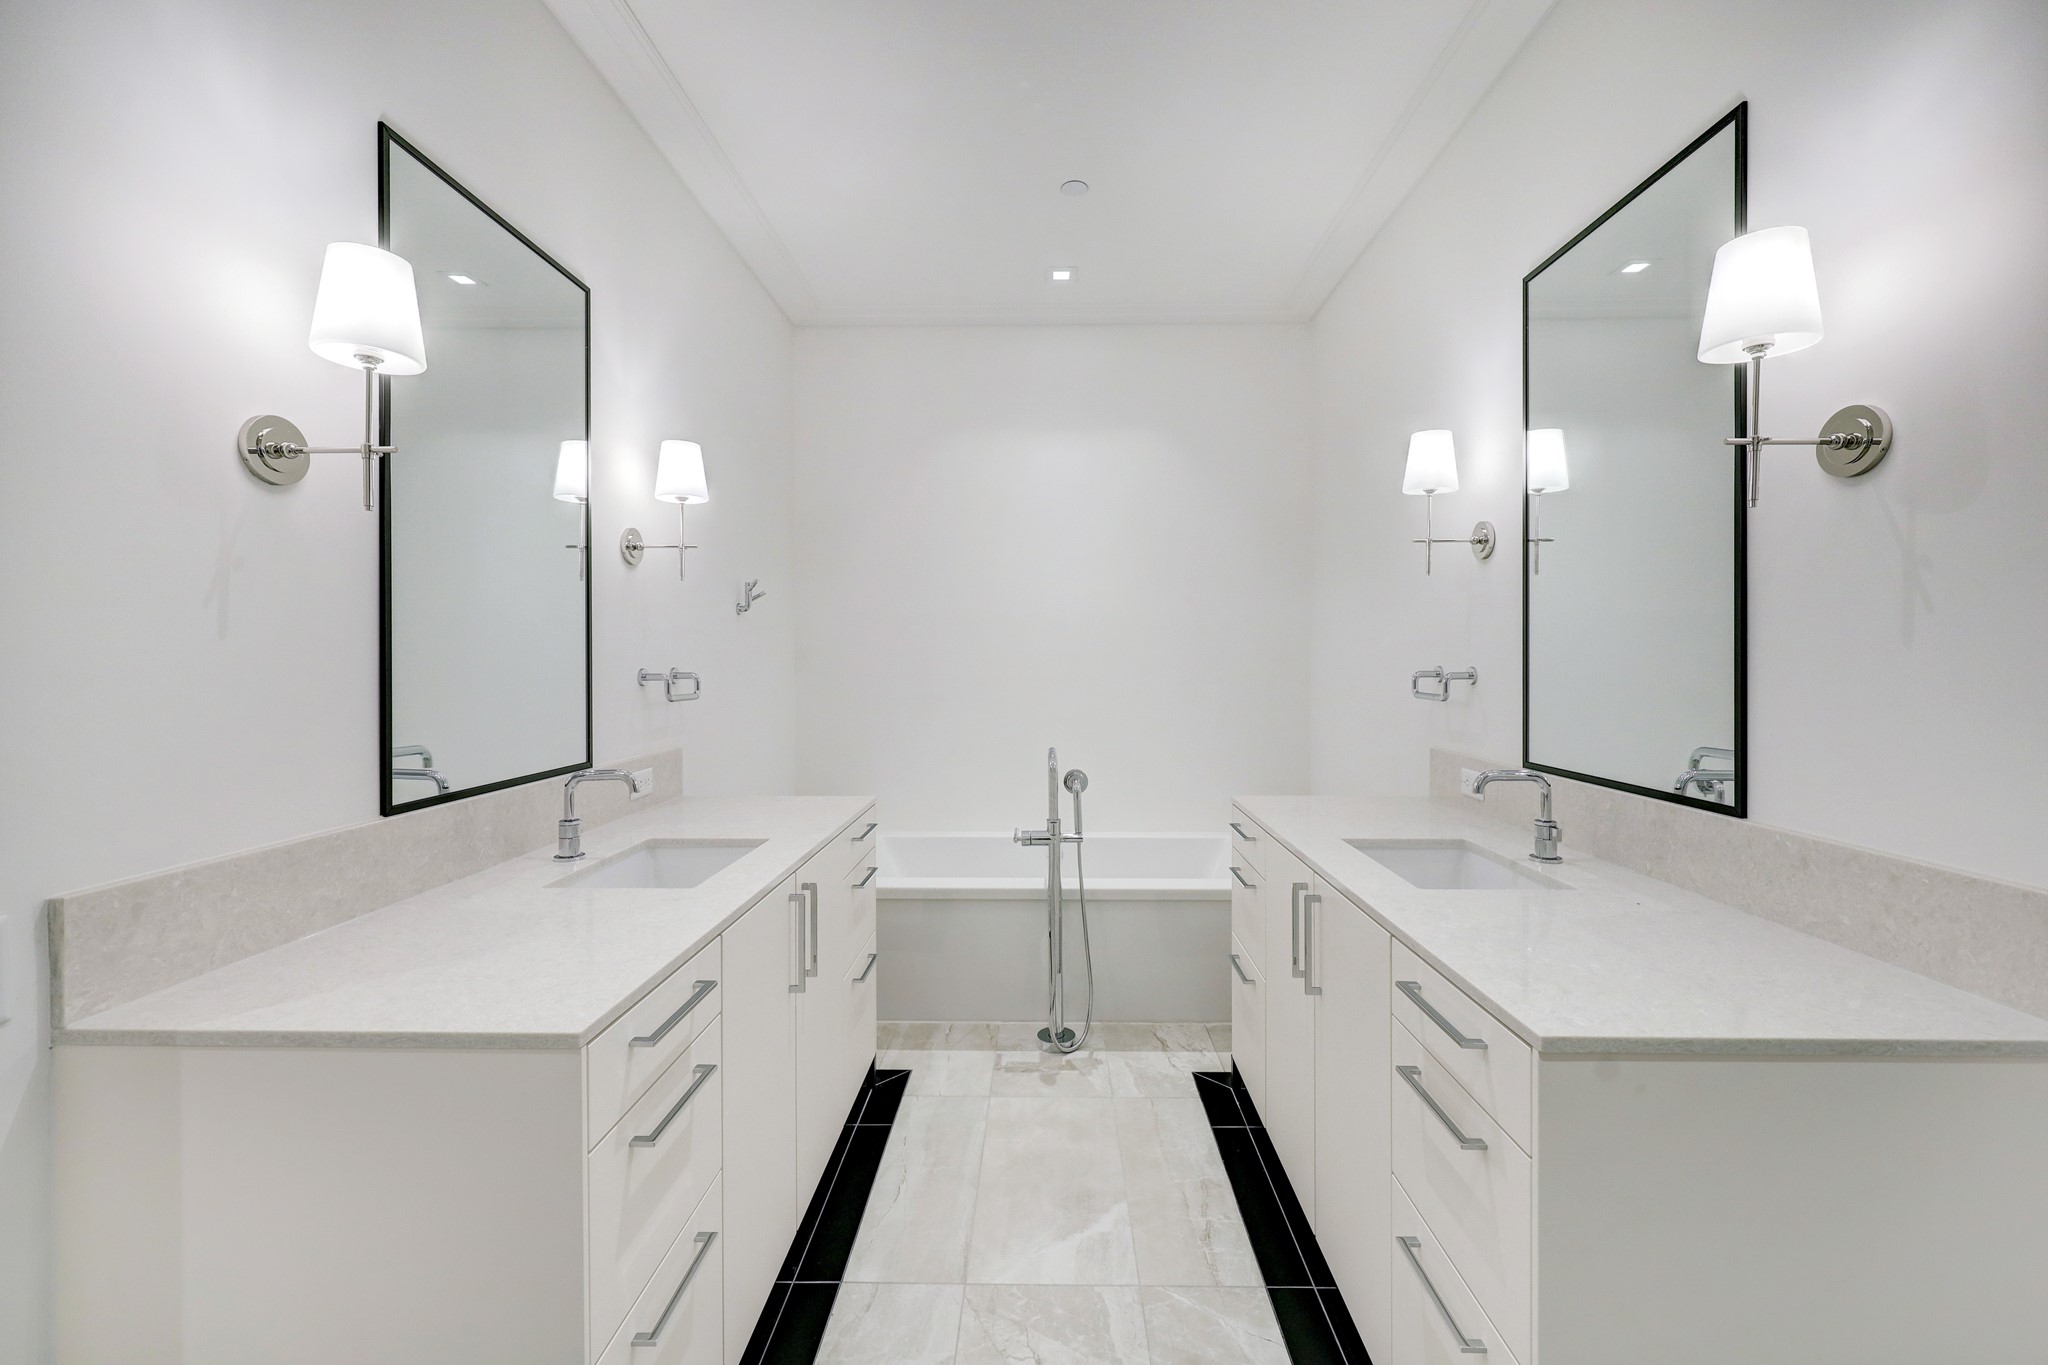 This primary bathroom is well laid out and complete with luxury finishes and symmetrical dual vanities framed by an expanse of rich quartz. A statement making soaking tub anchors the space with a feature art wall above.